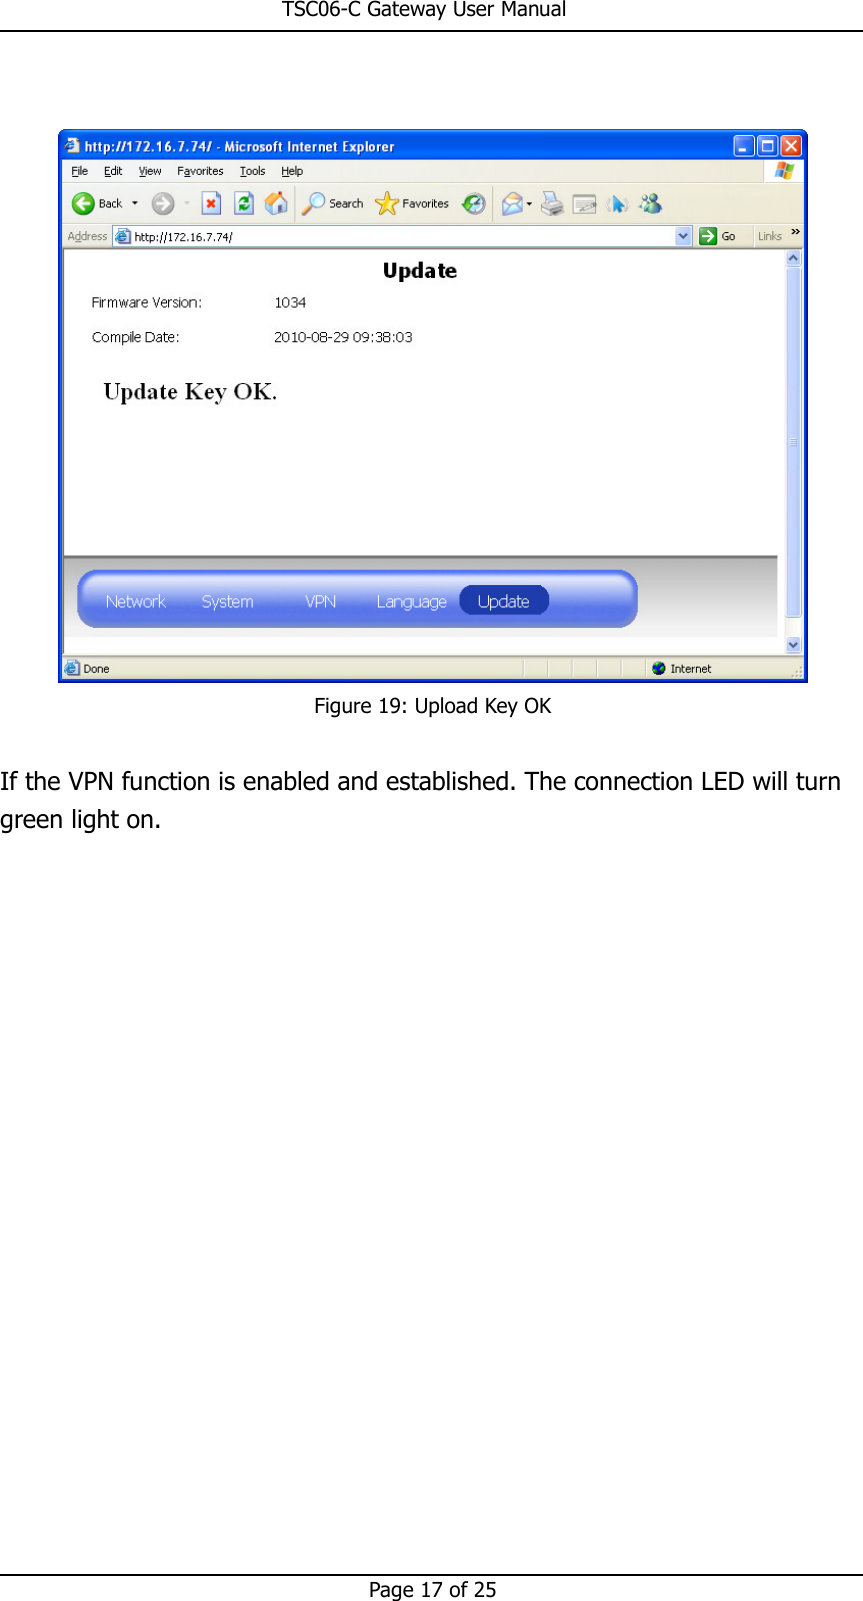                                                       TSC06-C Gateway User Manual   Page 17 of 25    Figure 19: Upload Key OK  If the VPN function is enabled and established. The connection LED will turn green light on.  